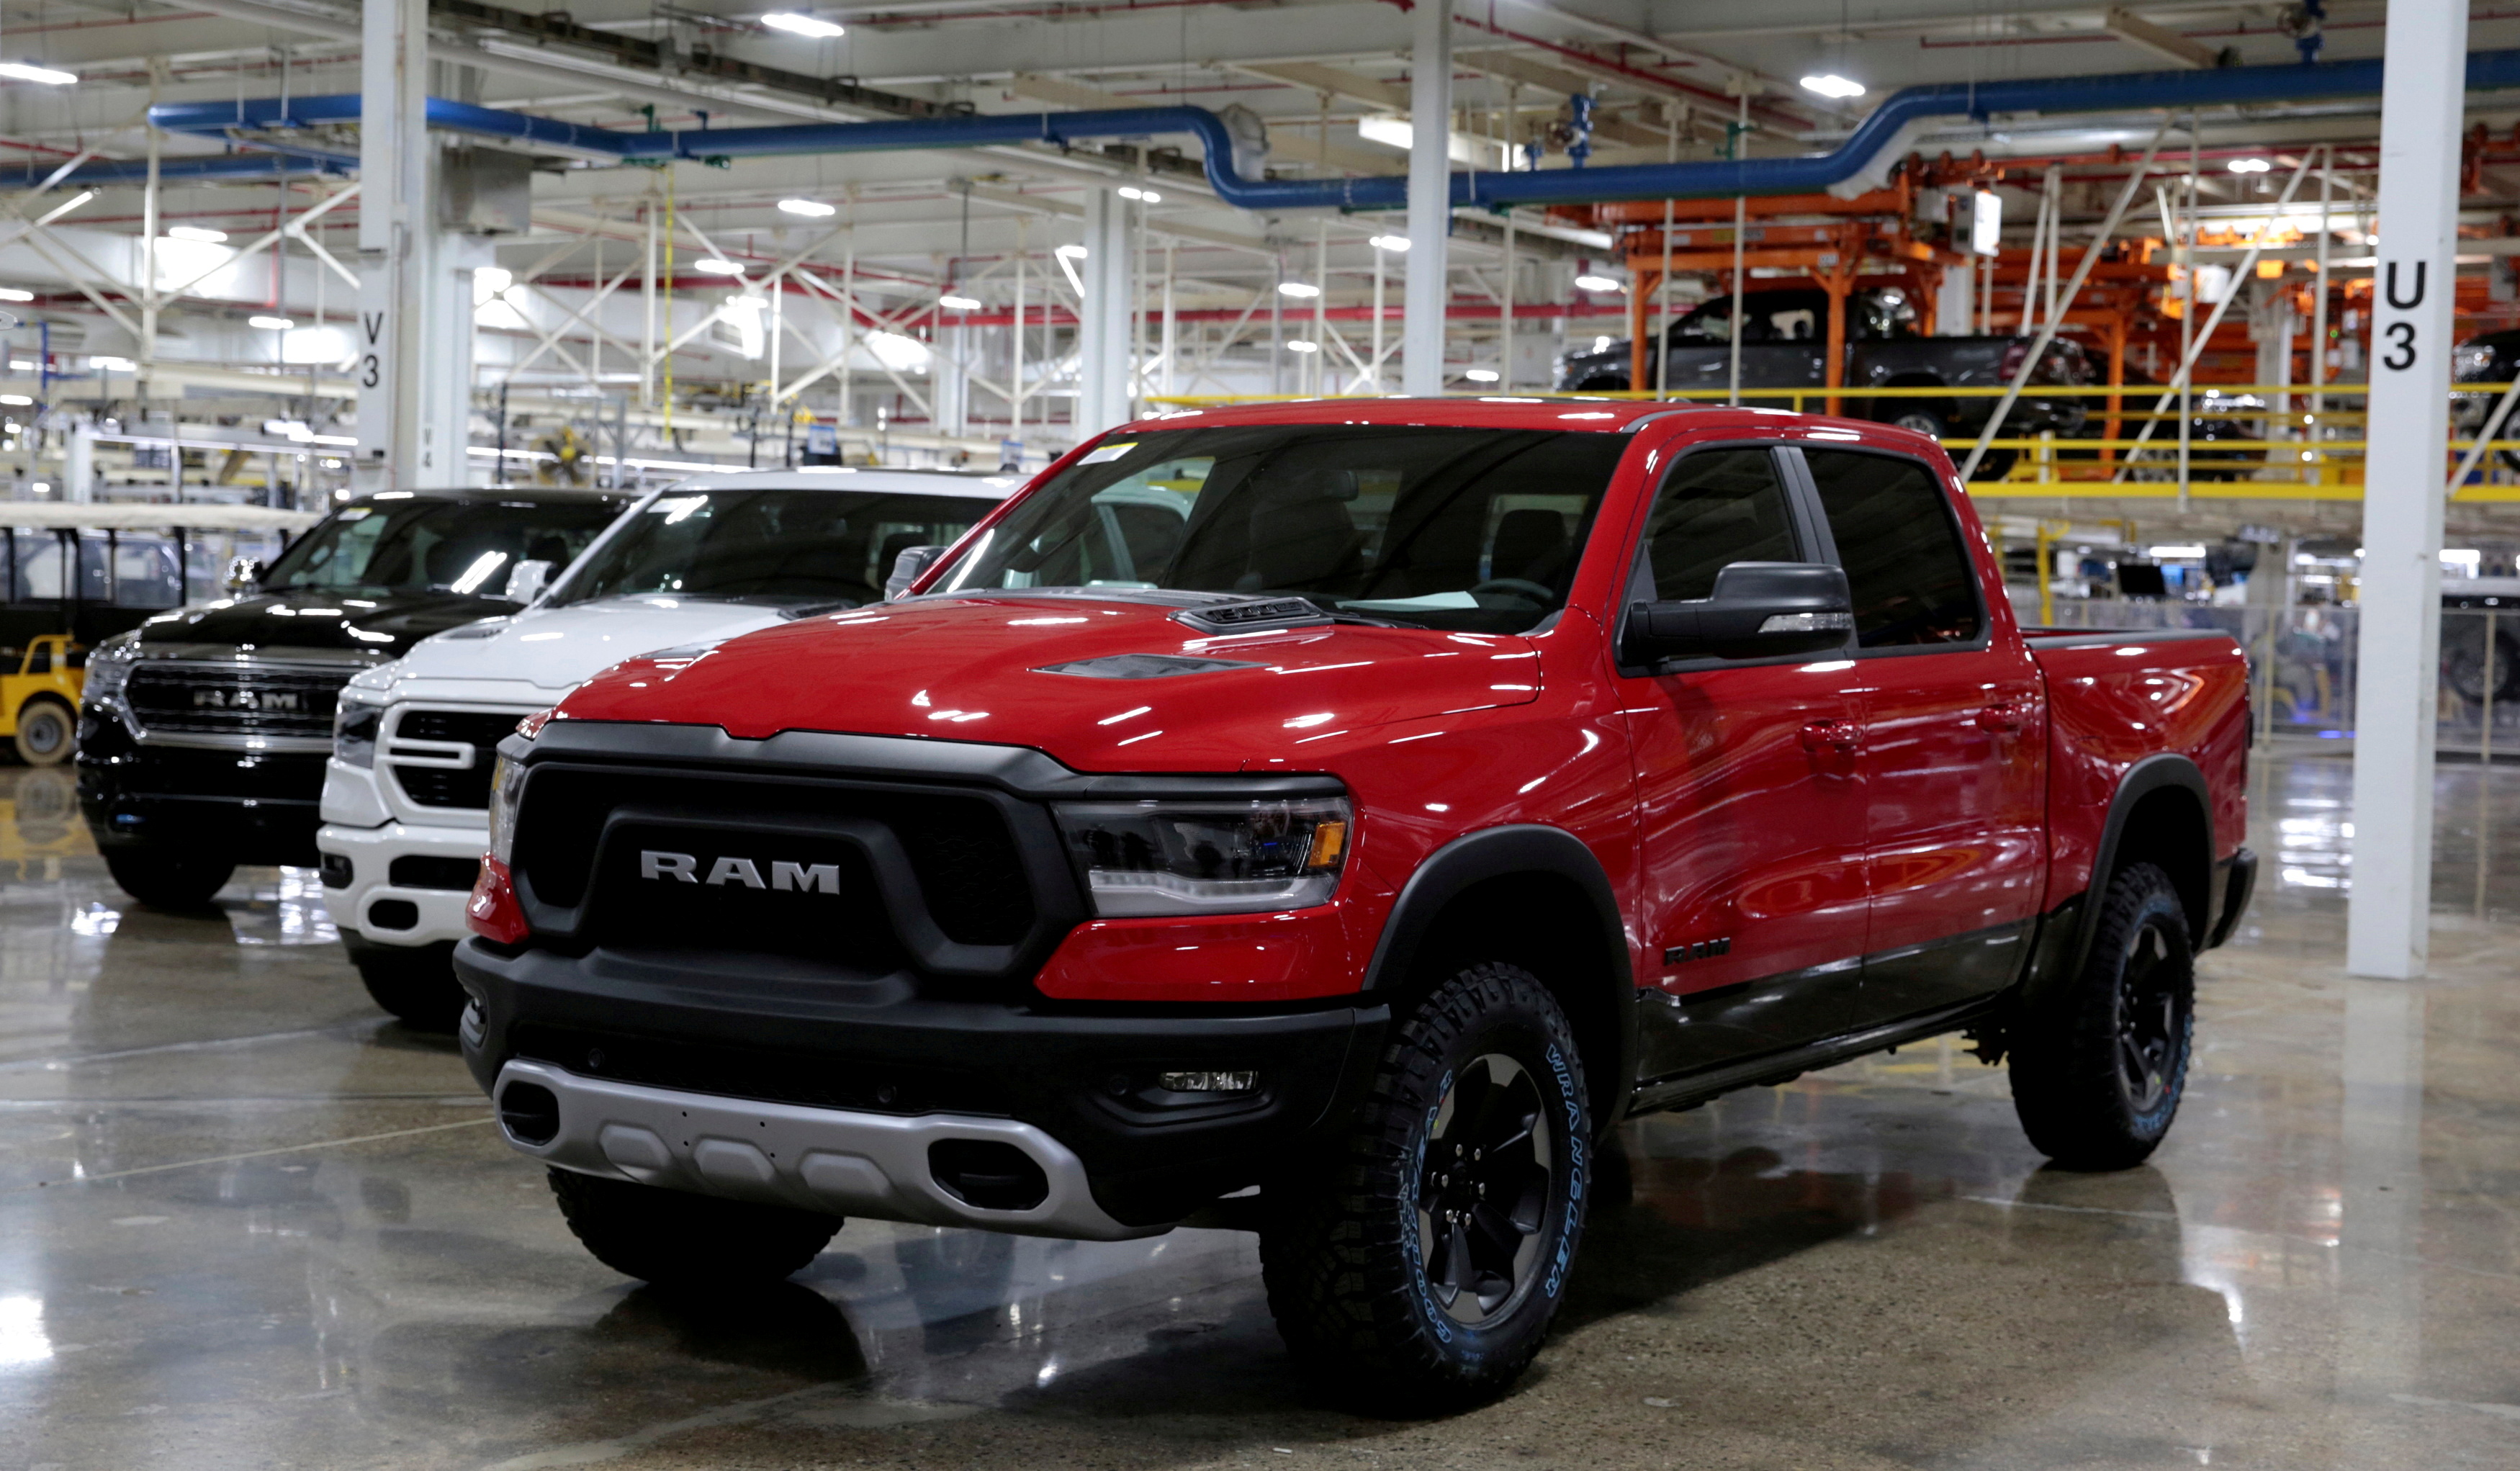 2019 Ram pickup trucks are on display at the Fiat Chrysler Automobiles (FCA) Sterling Heights Assembly Plant in Sterling Heights, Michigan, U.S., October 22, 2018. The former Fiat Chrysler is now Stellantis. REUTERS/Rebecca Cook